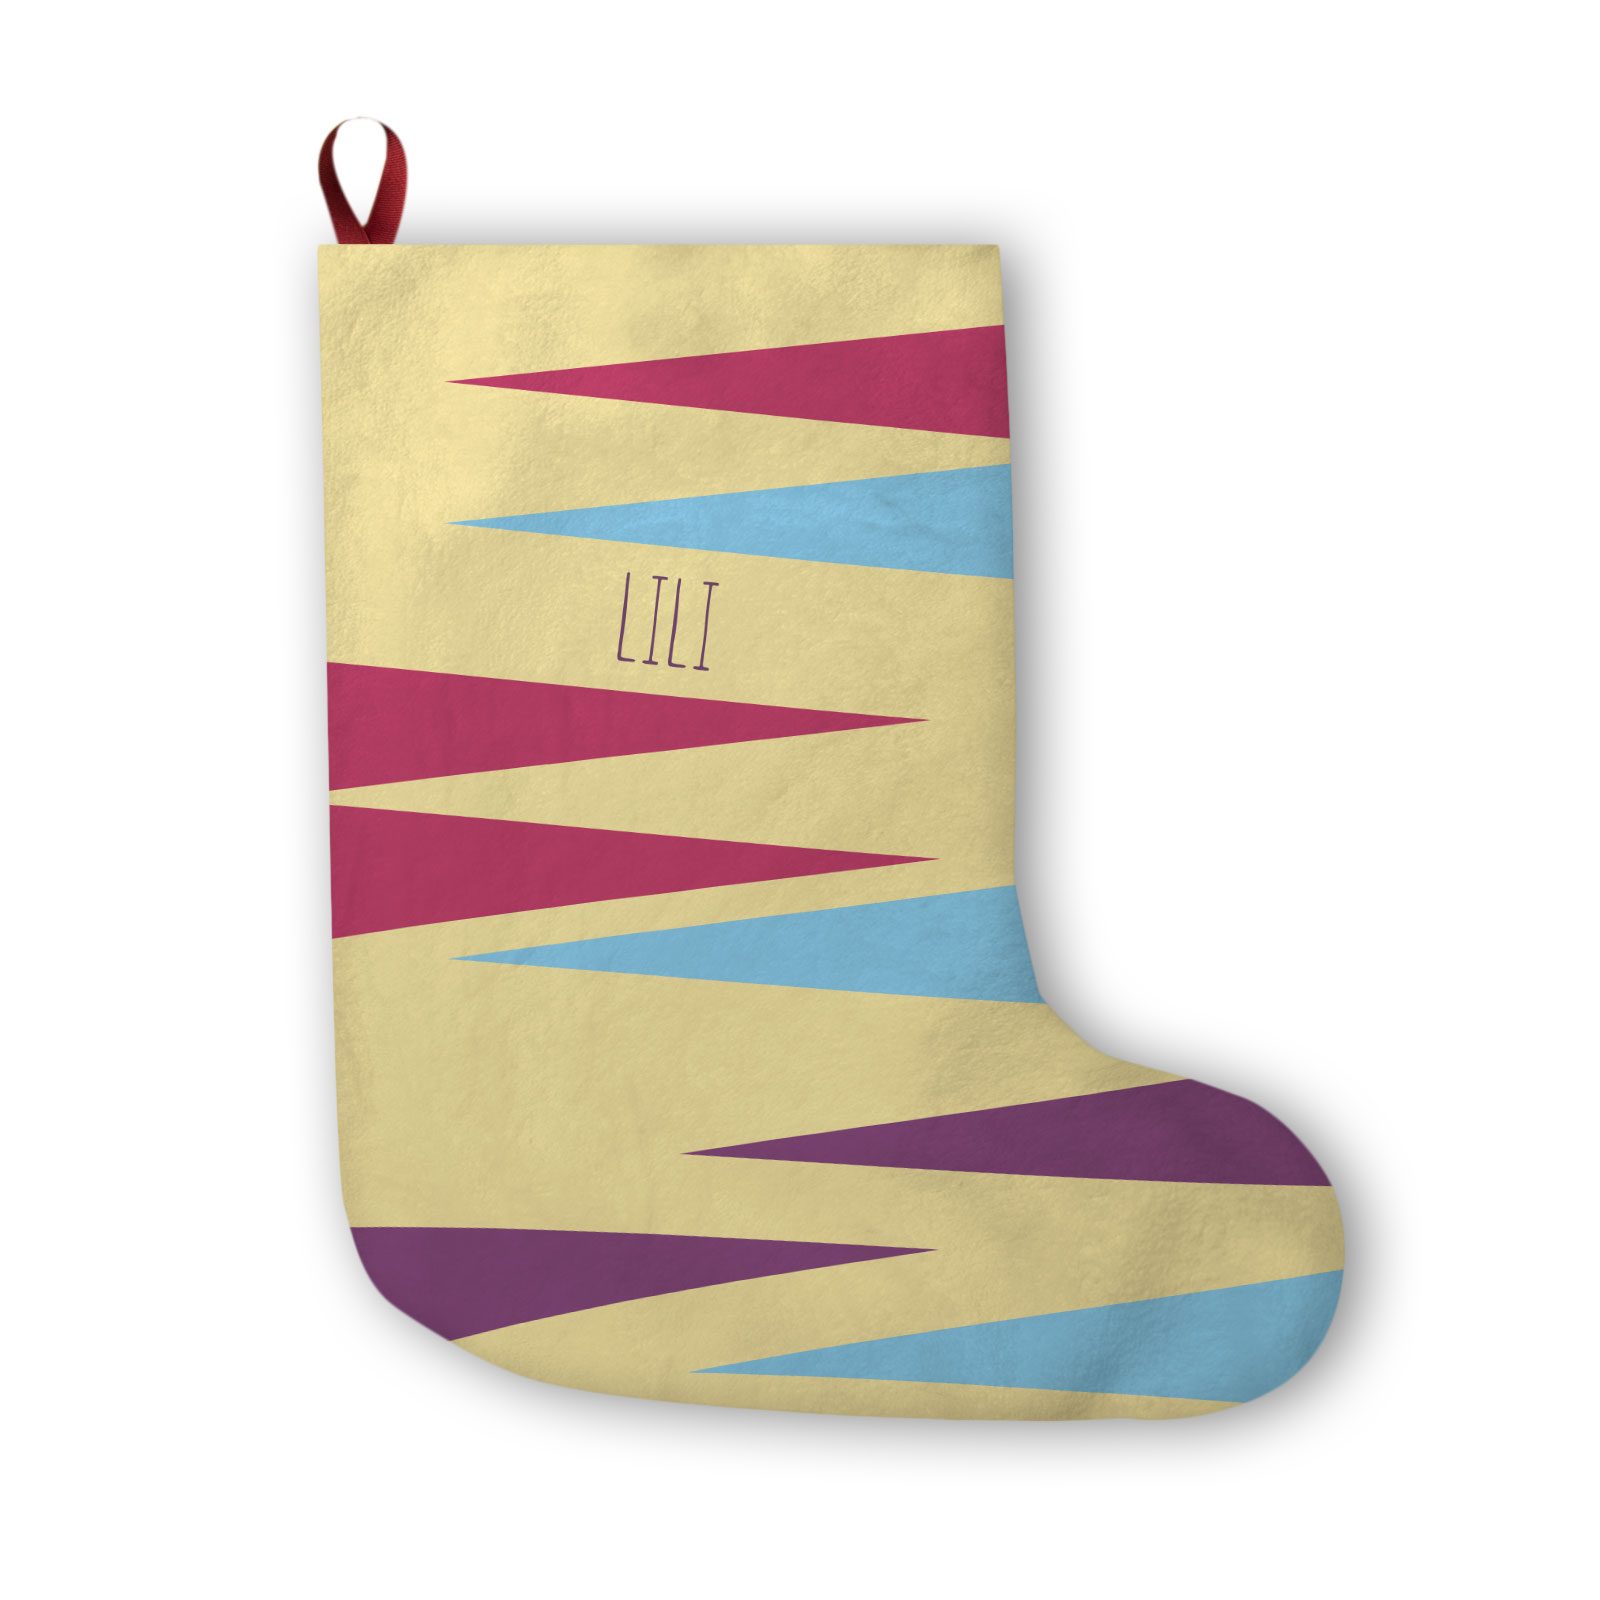 Personalizable Christmas Stocking – Funky Triangles in Yellow